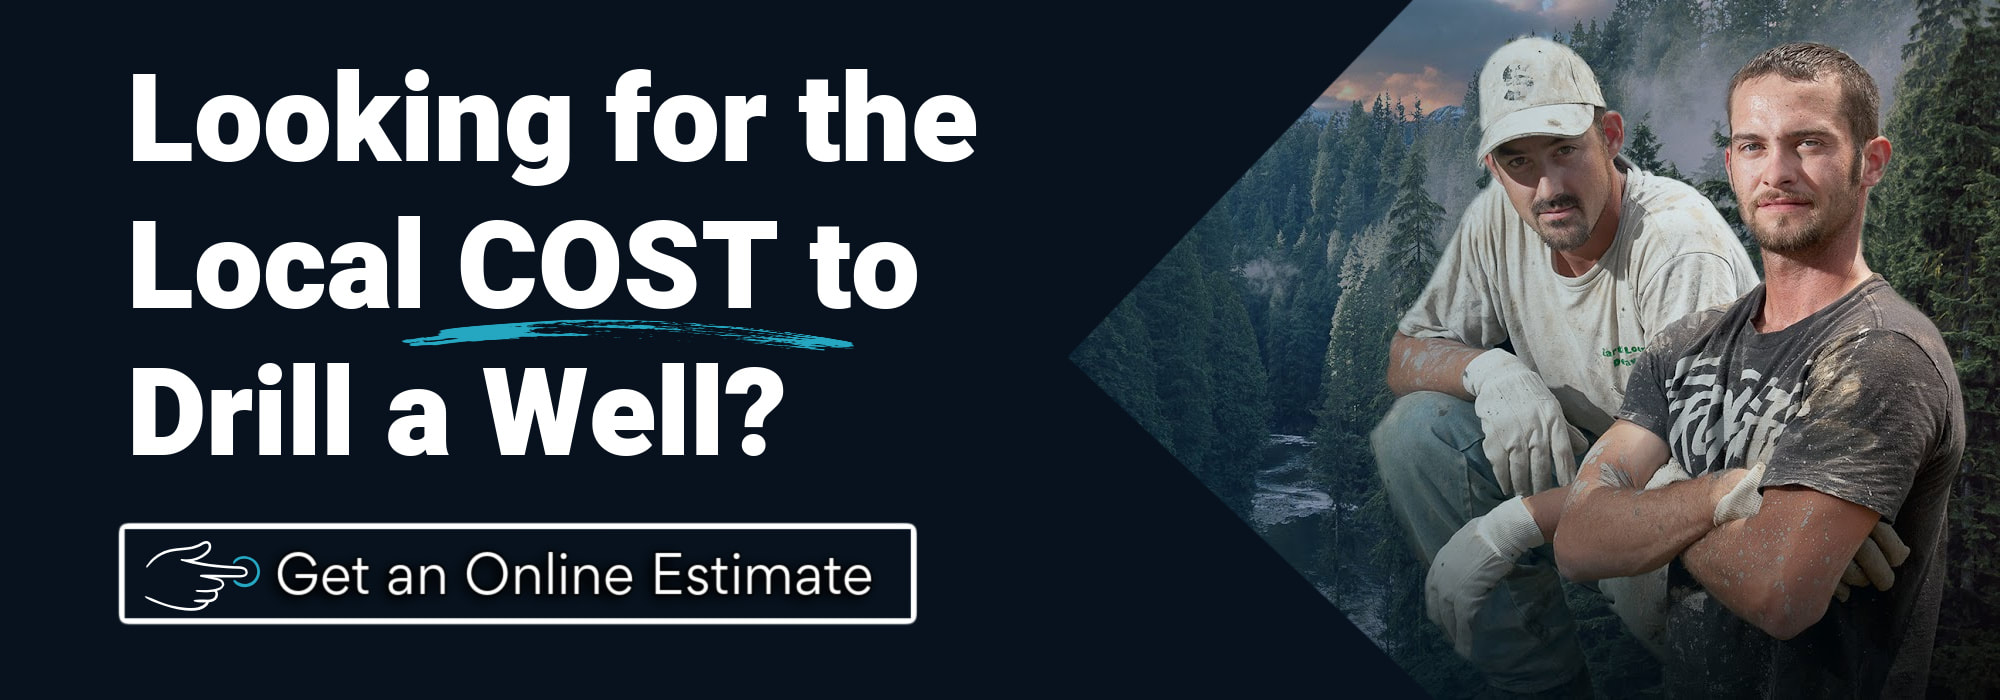 learn more about water well drilling and the cost to drill a well on Vancouver Island